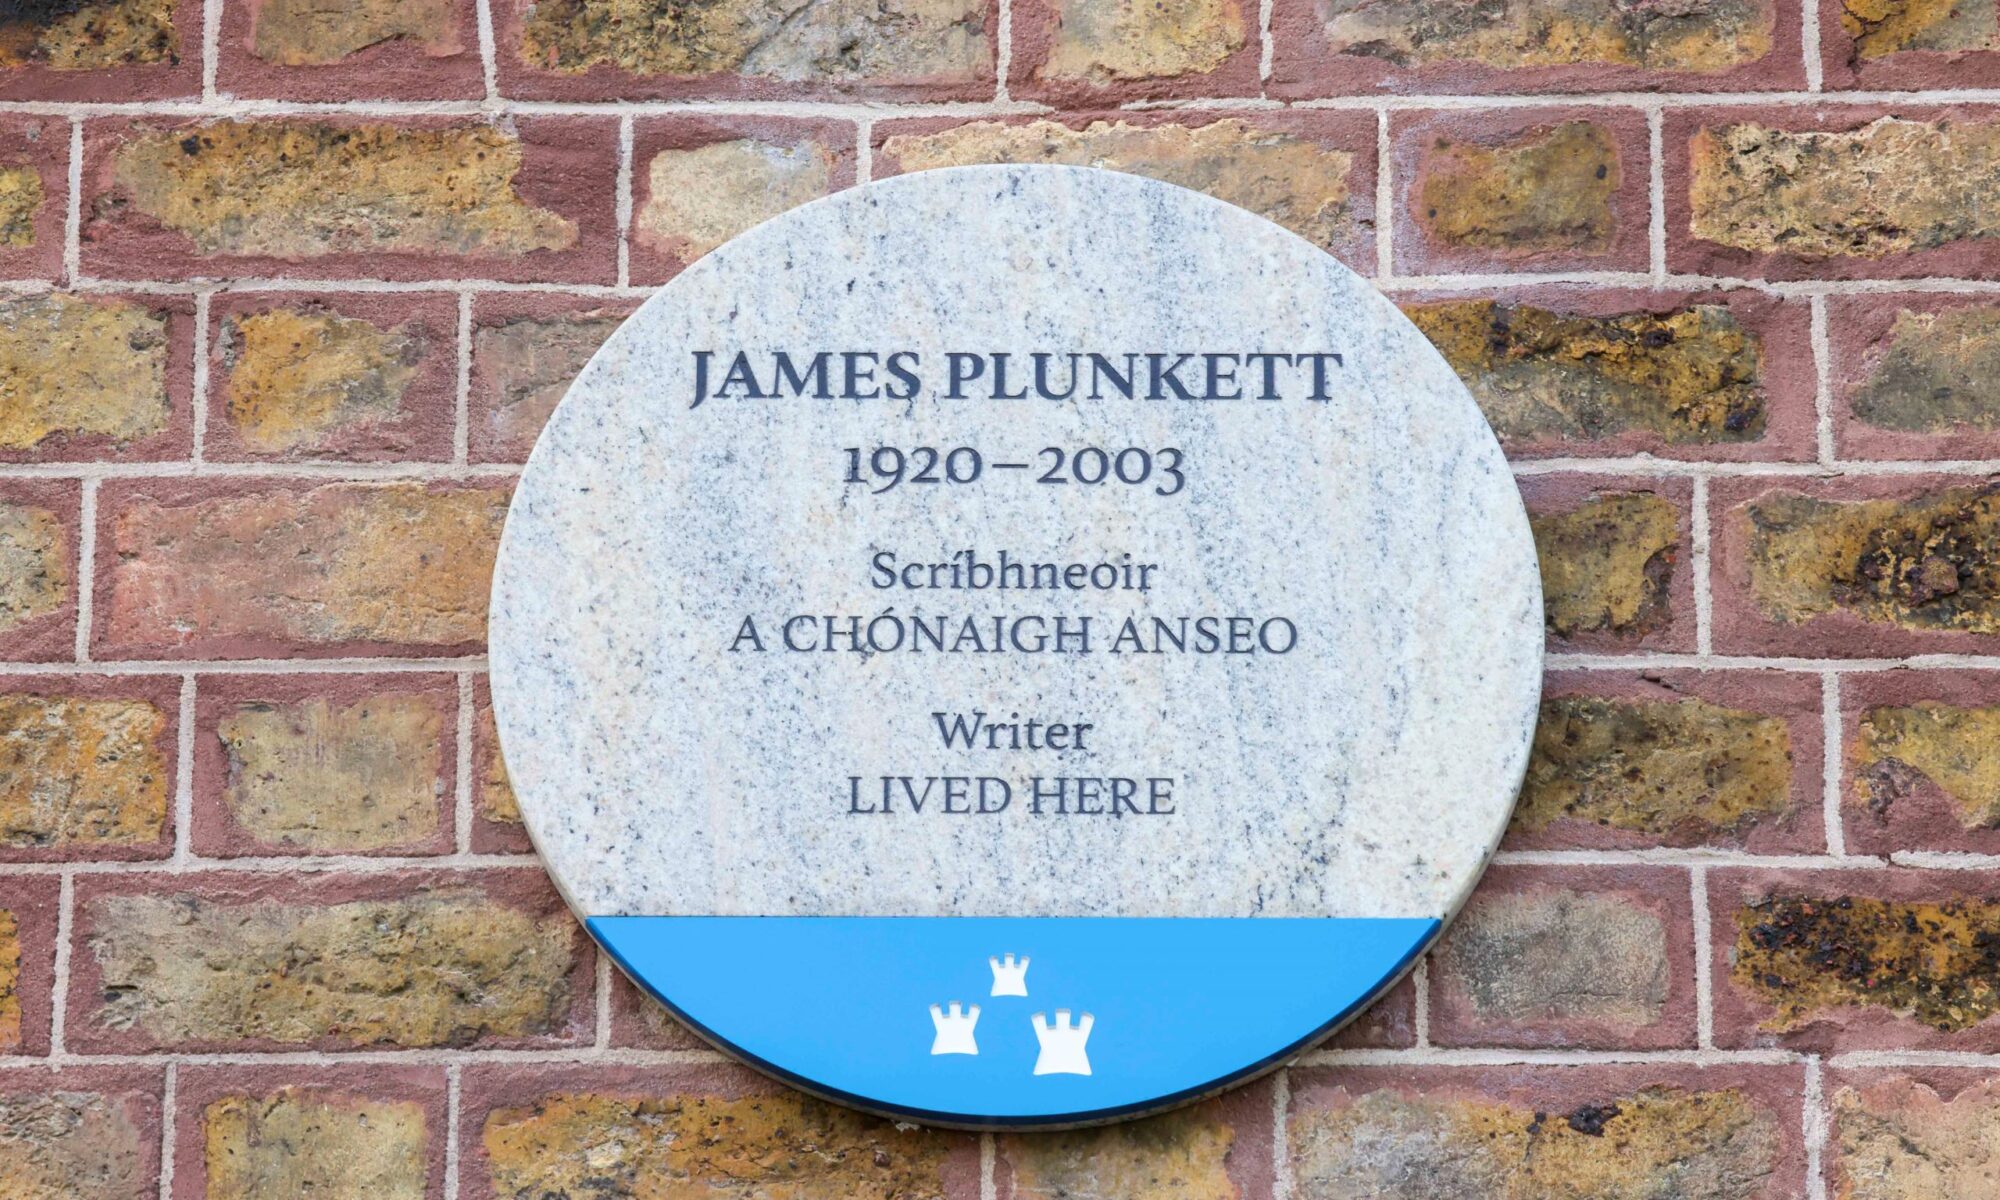 Photograph of a Dublin City plaque. on a red brick wall. The plaque is made of granite and has a blue base with the Dublin City Council logo on it. The text on the plaque is in both Irish and English and in English it reads 'James Plunkett 1920-2003 writer lived here'.